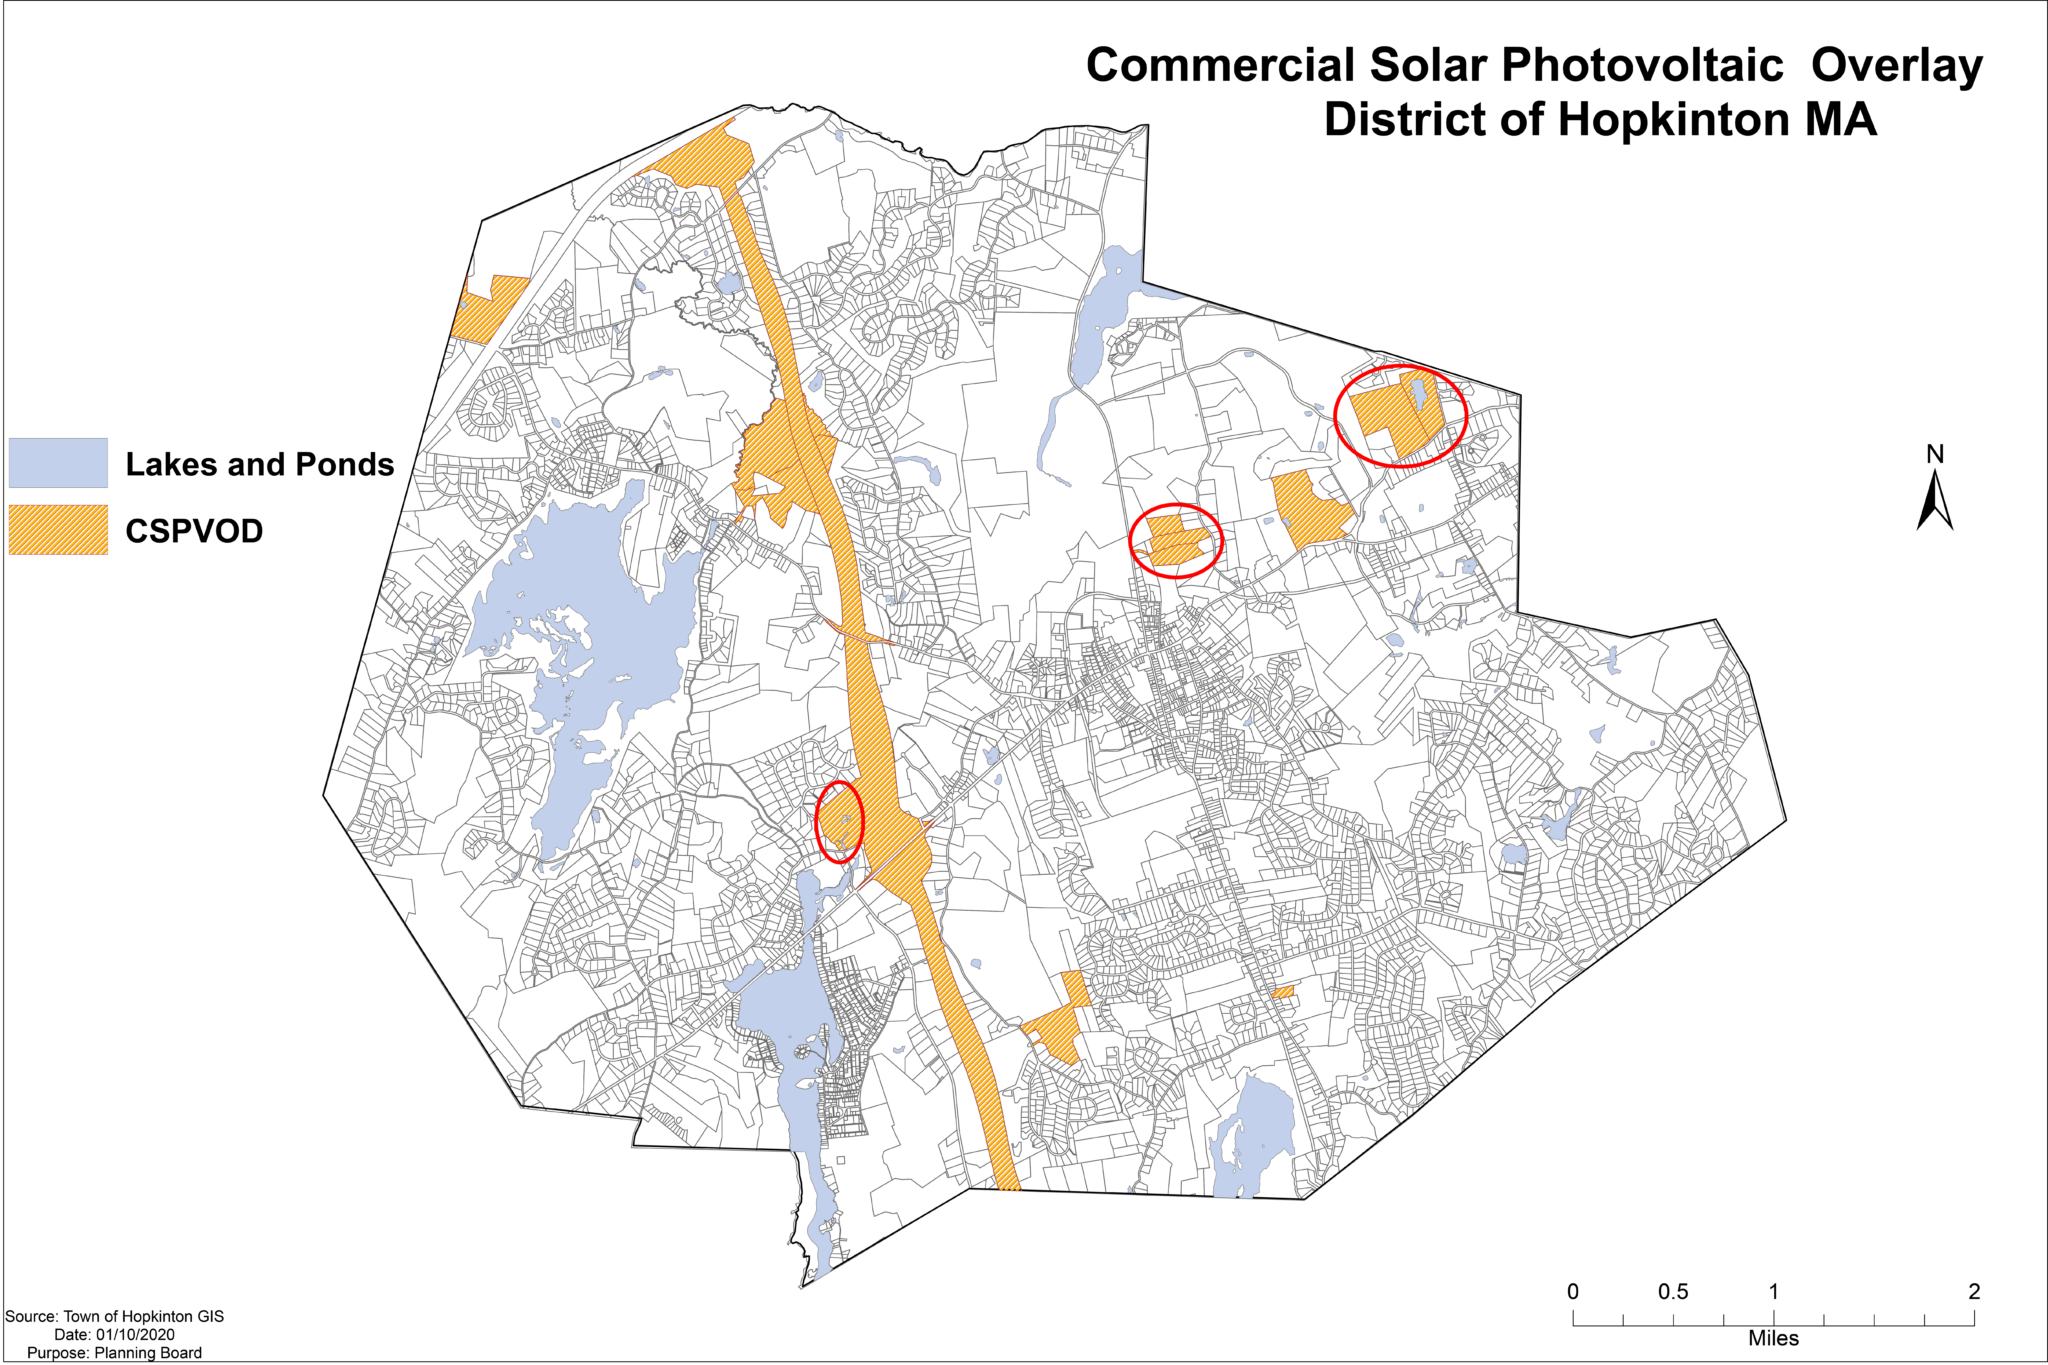 Town counsel raises concerns with Planning Board’s solar overlay map